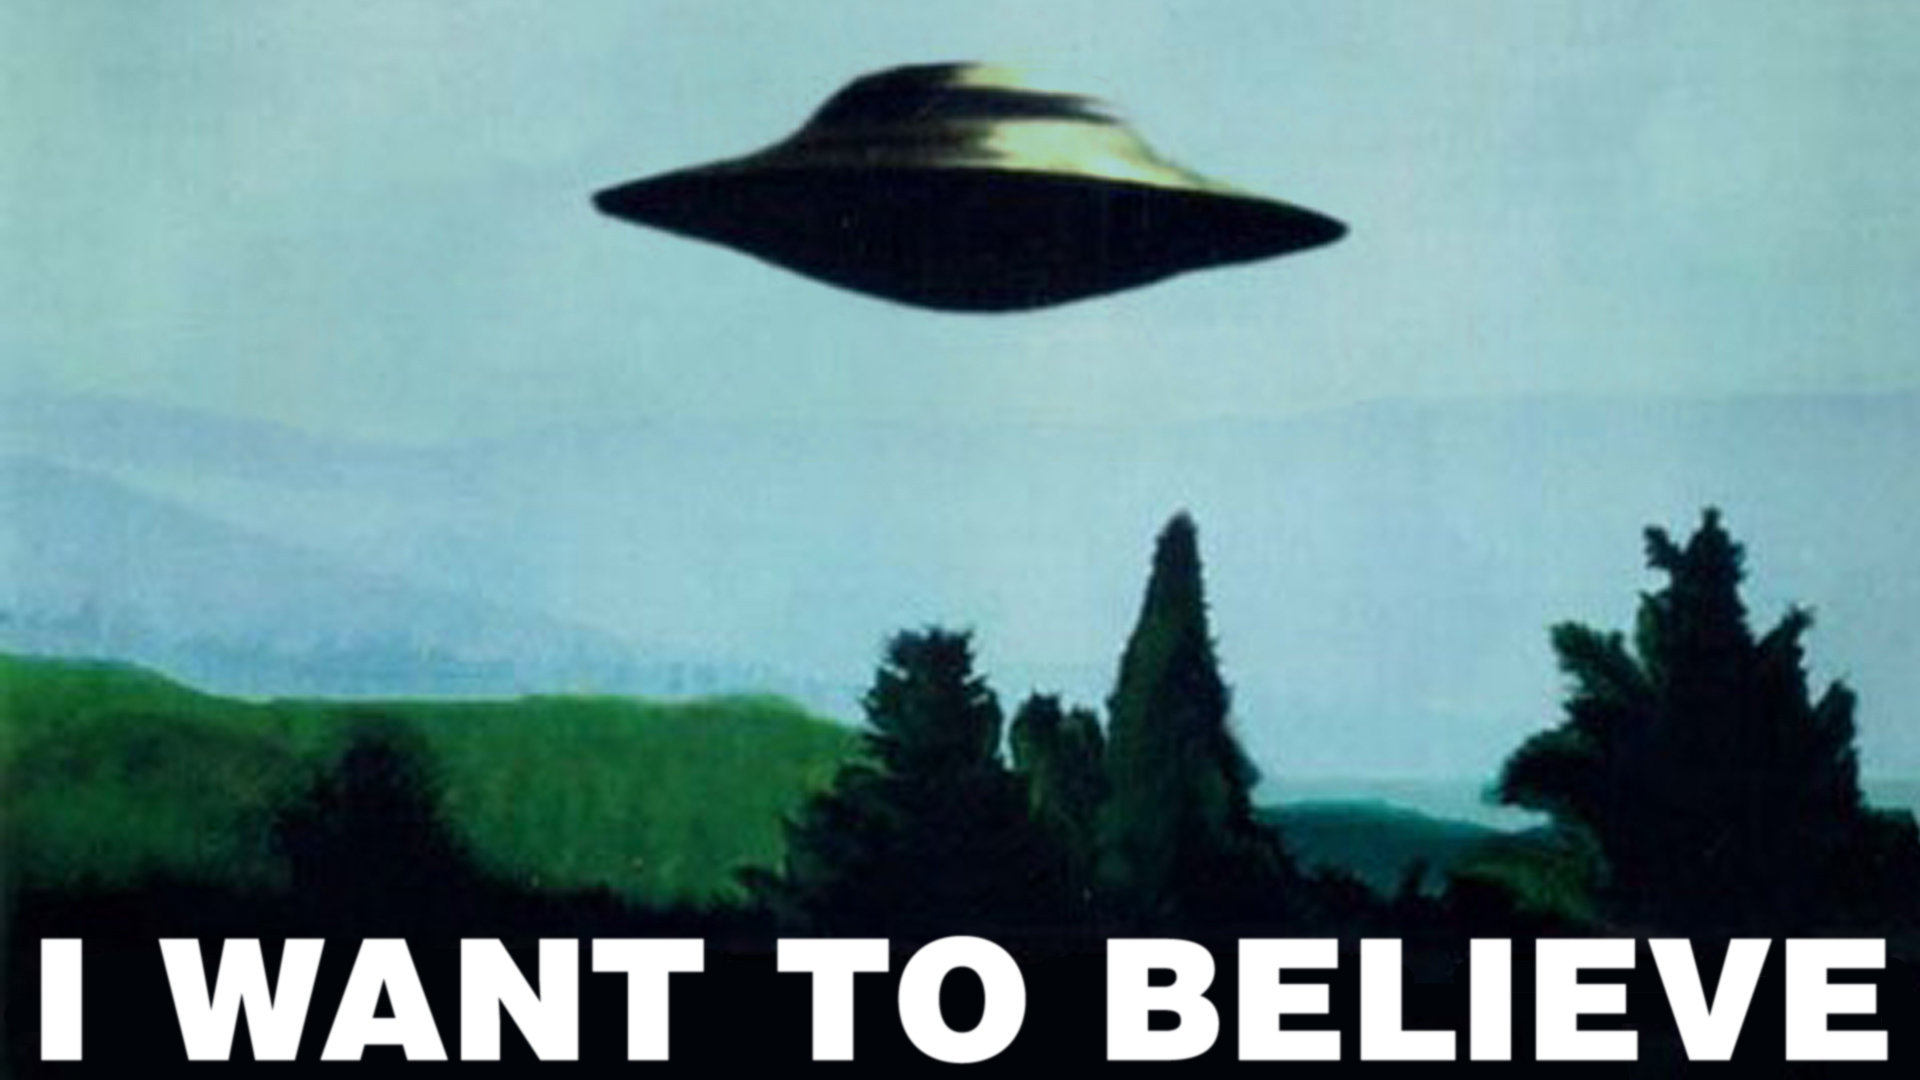 UFO flying in sky above words "I Want to Believe"